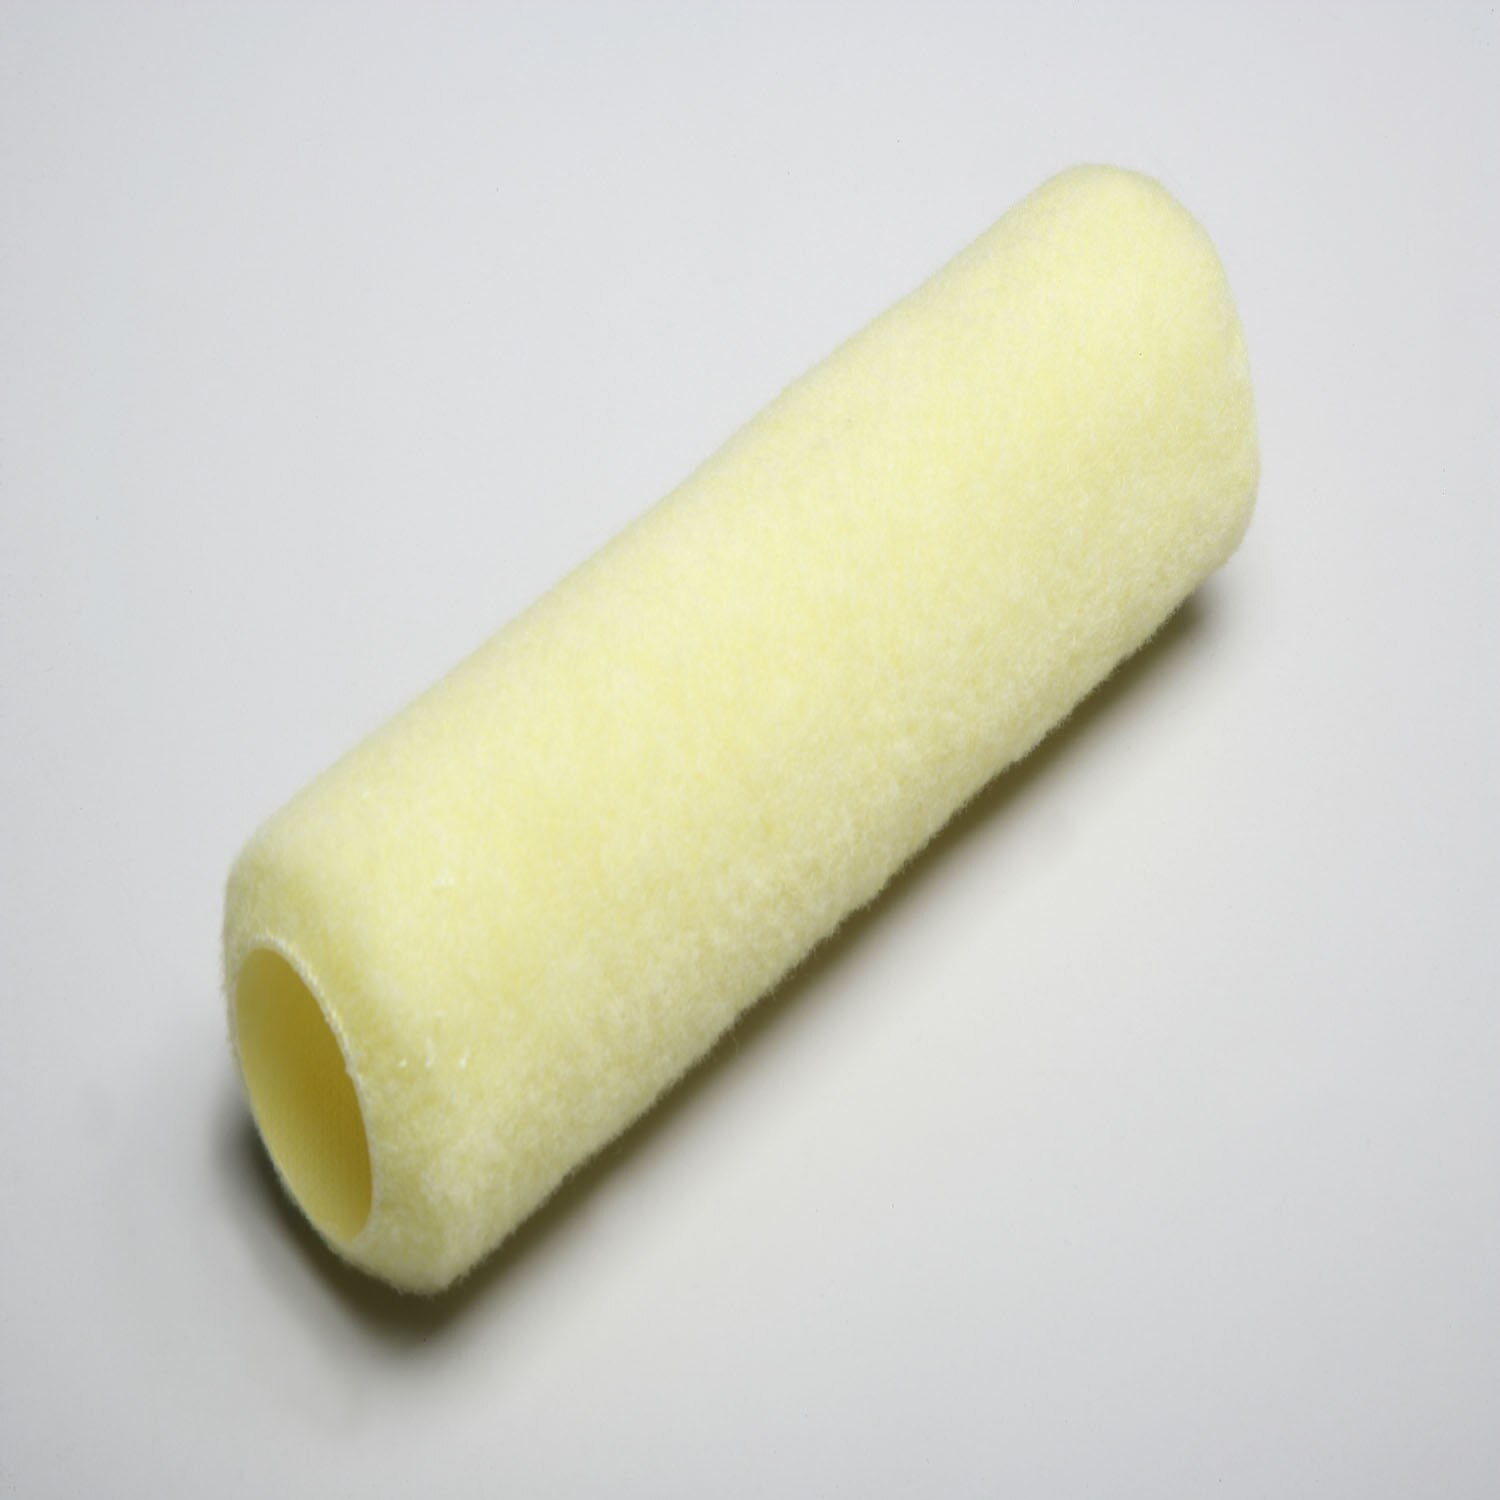 Cover, Paint Roller, 9", Knit Fabric, 3/8" NAP, High Capacity, EA